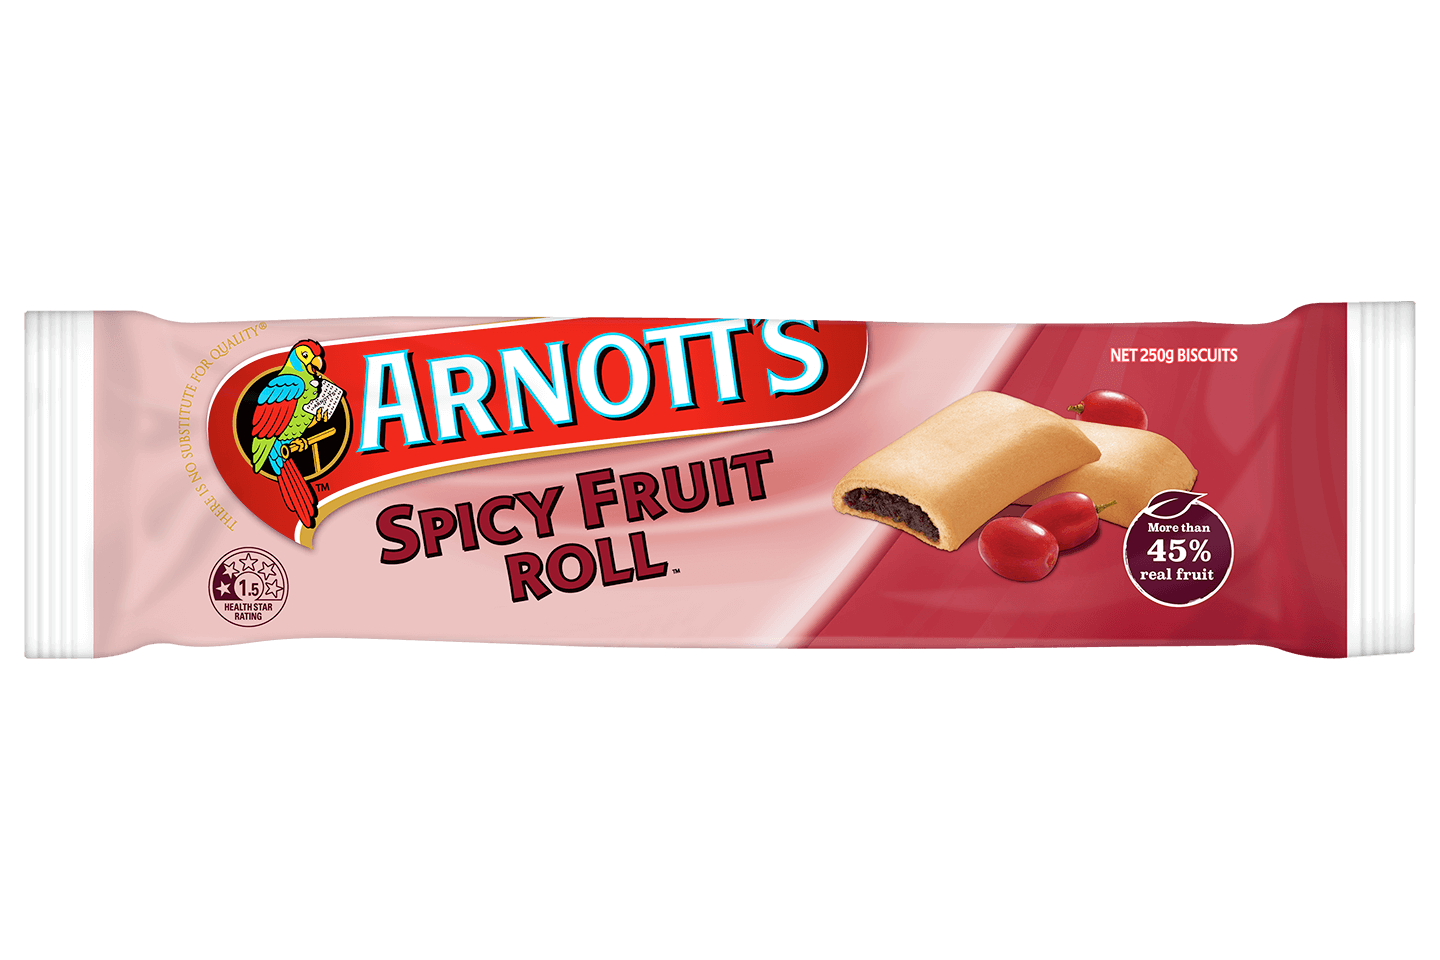 Spicy Fruit Roll